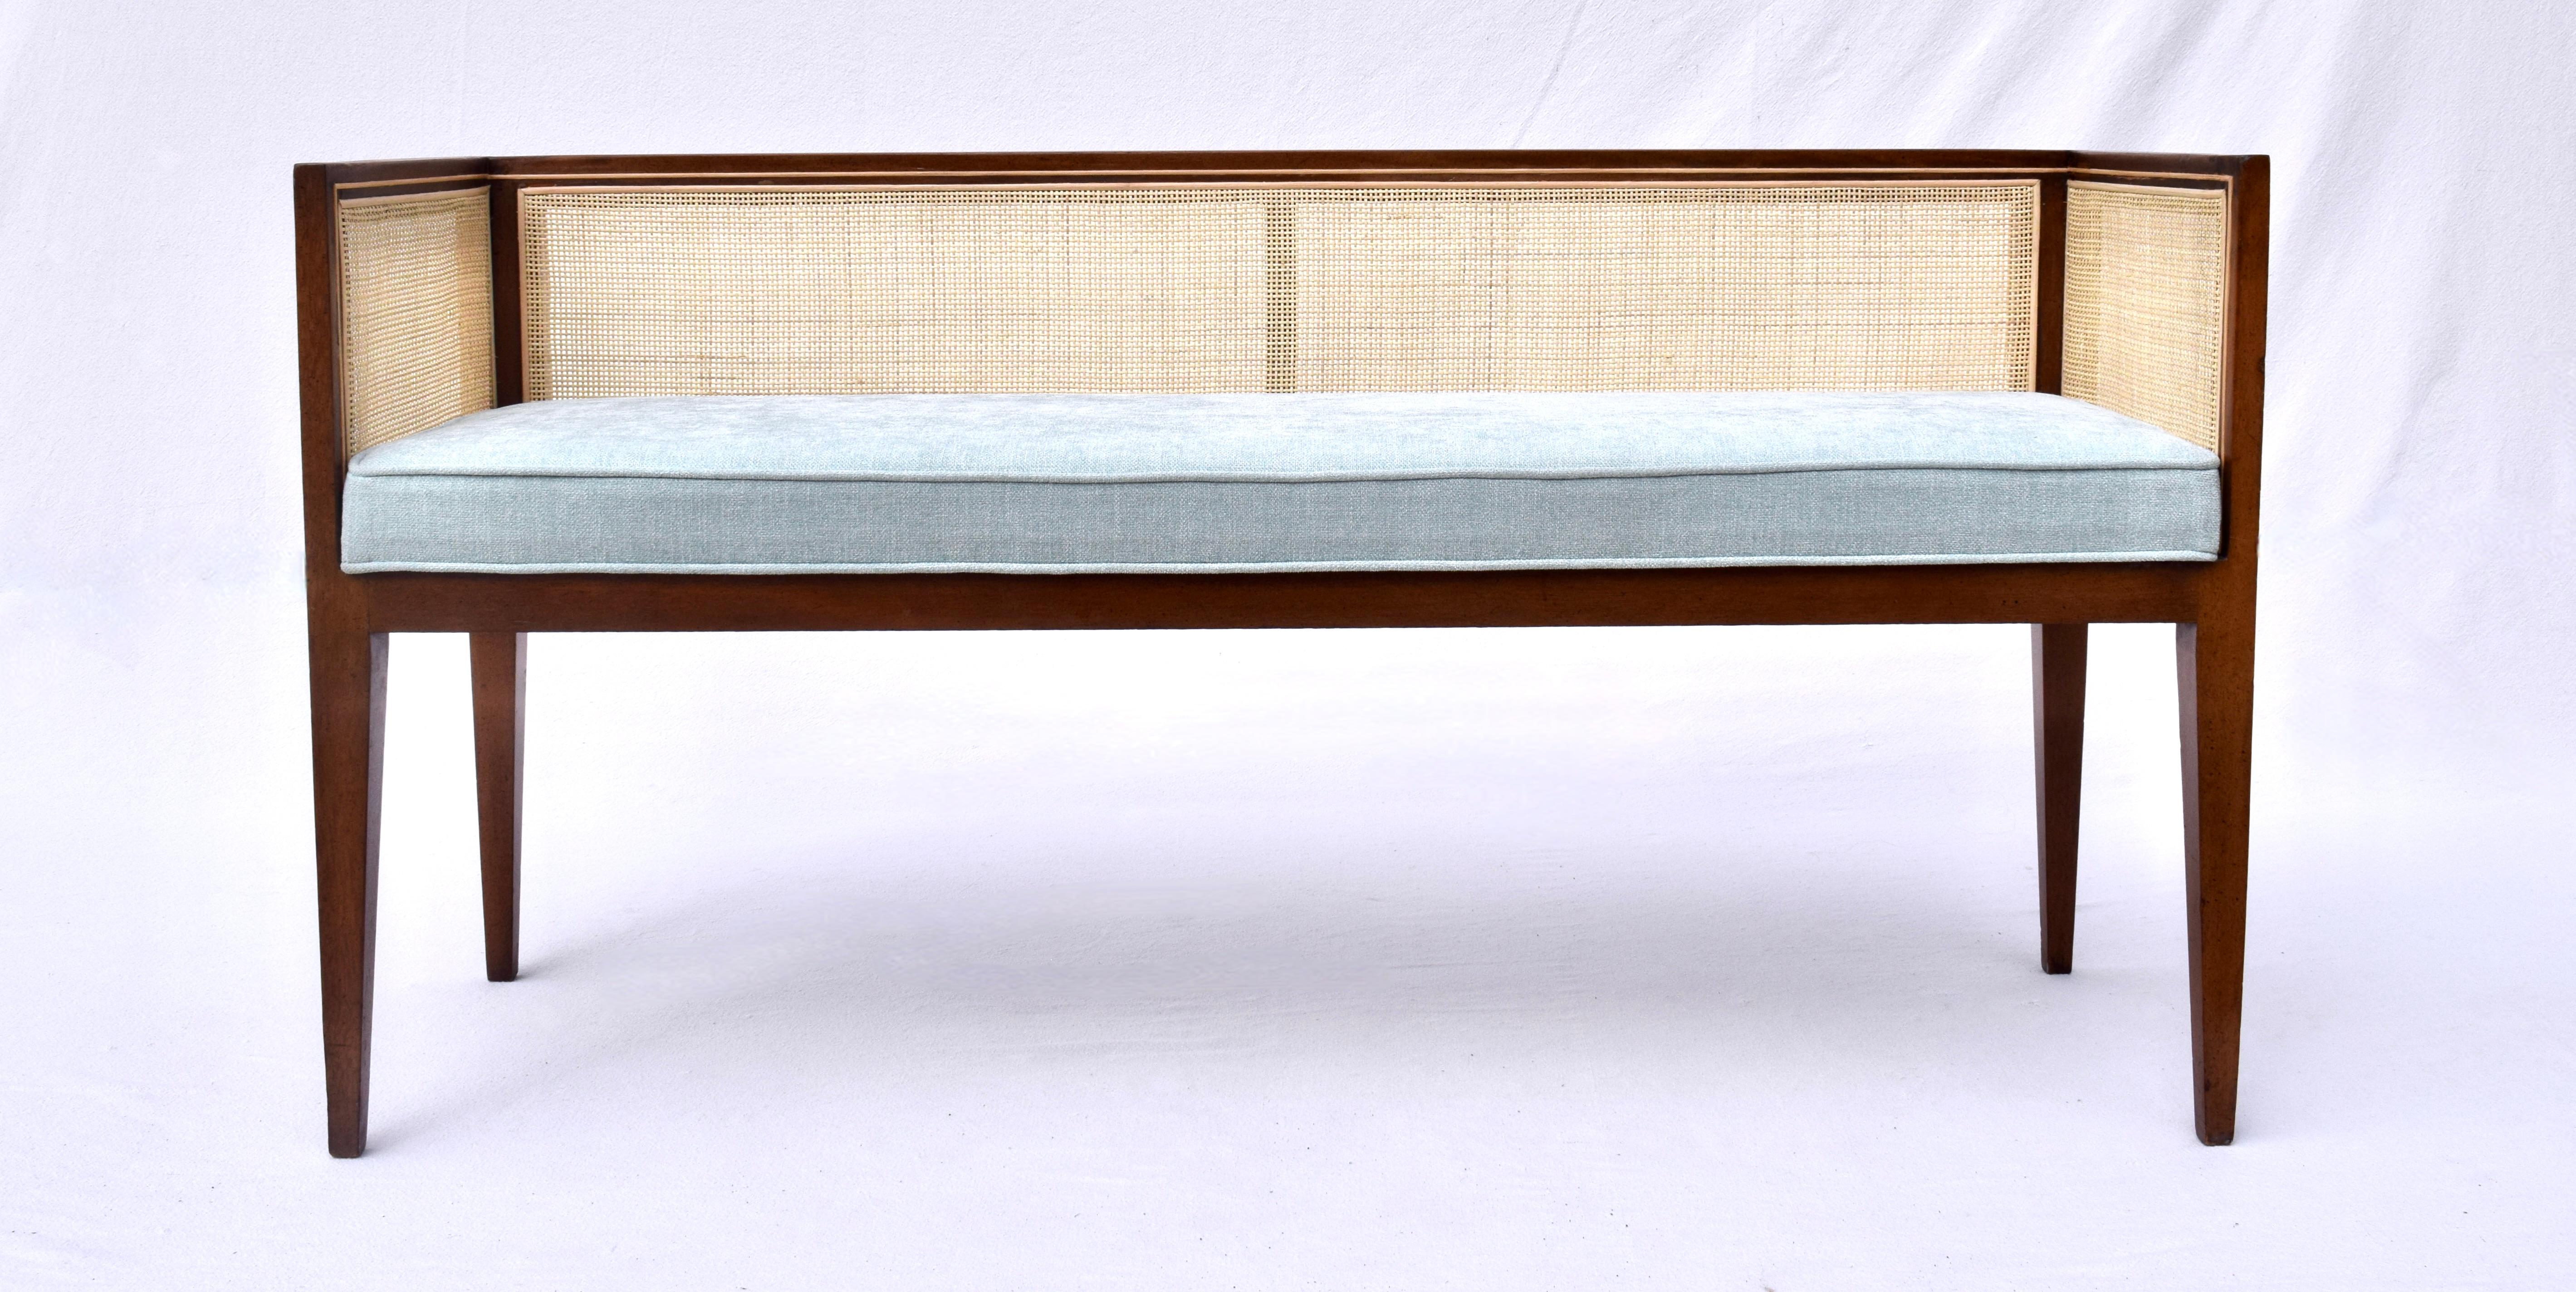 American 1950s Walnut Window Bench Attributed to Edward Wormley for Dunbar For Sale